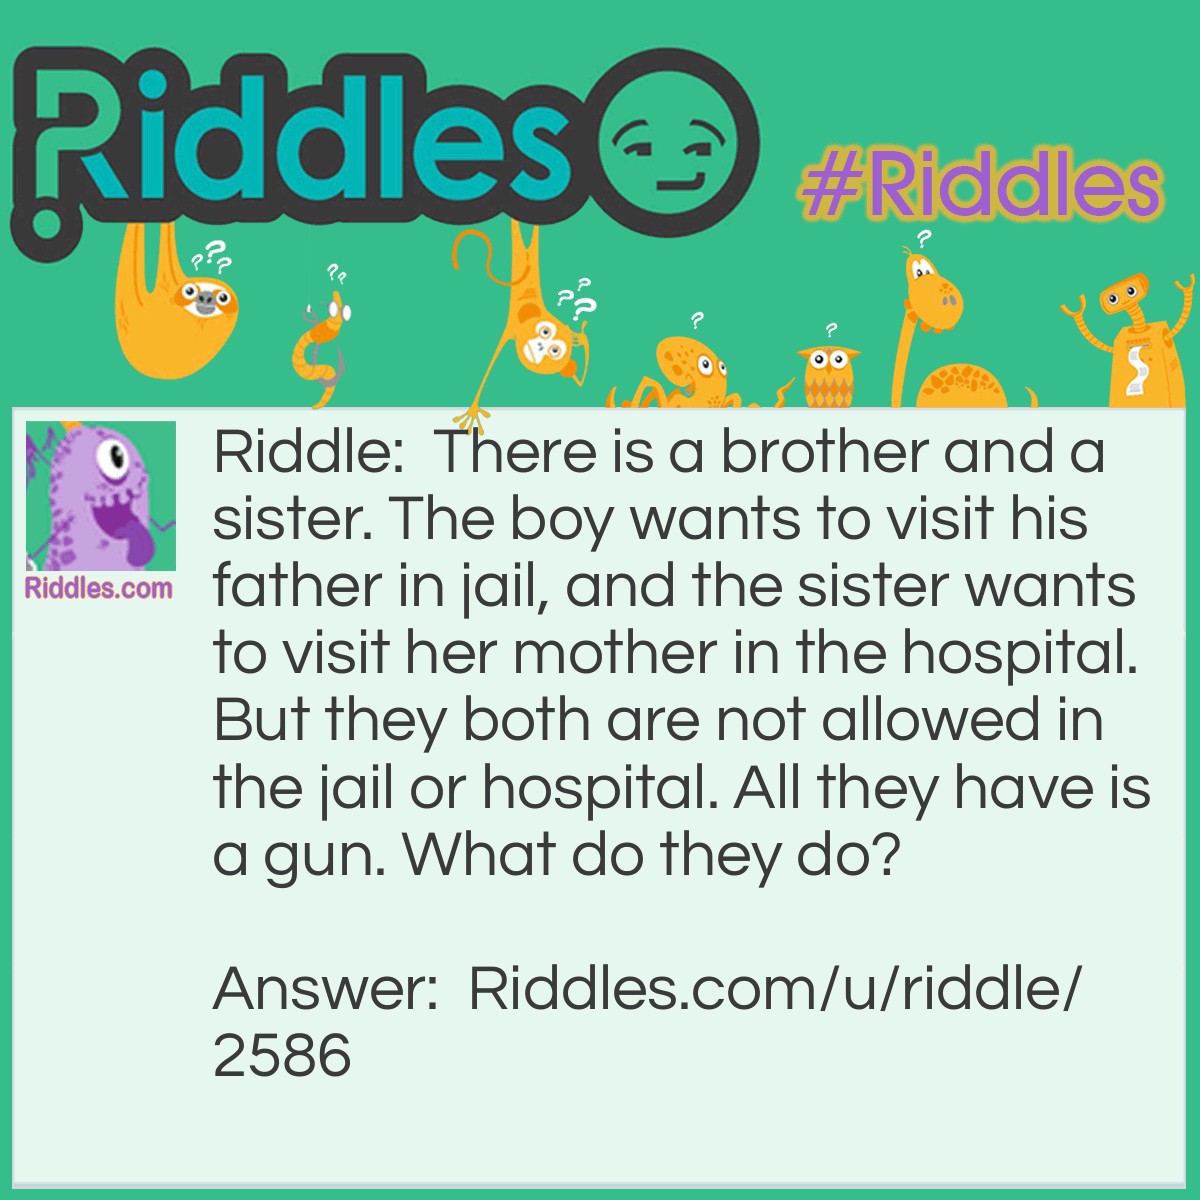 Riddle: There is a brother and a sister. The boy wants to visit his father in jail, and the sister wants to visit her mother in the hospital. But they both are not allowed in the jail or hospital. All they have is a gun. What do they do? Answer: The boy shoots the girl, and then the boy goes to jail for attempted murder and the girl goes to the hospital due to her injuries.